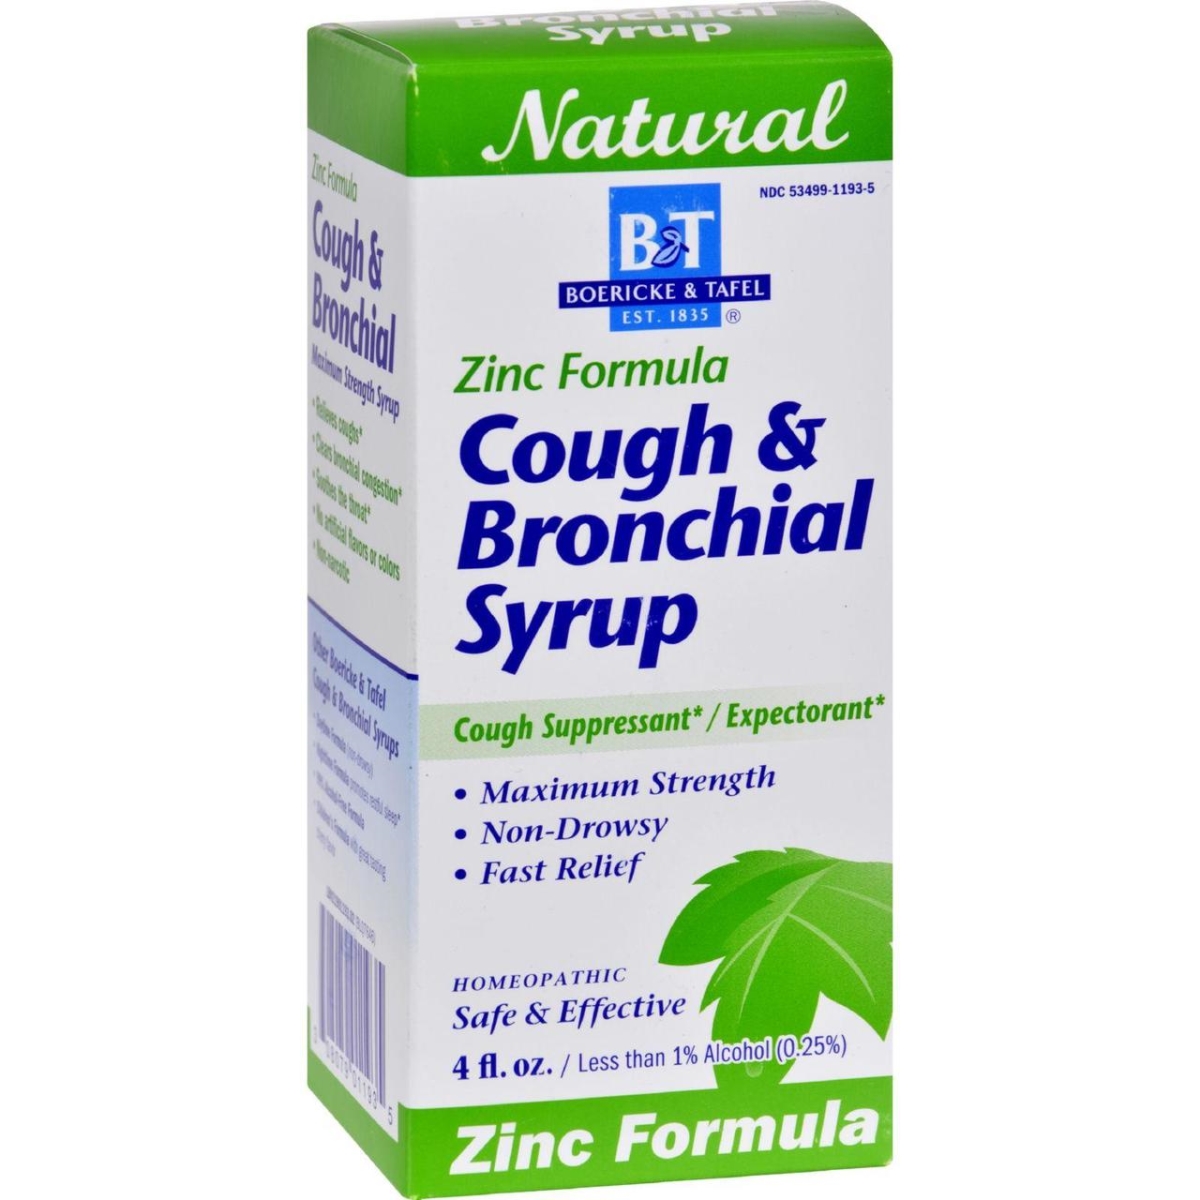 Hg0648964 4 Oz Cough & Bronchitis Syrup With Zinc